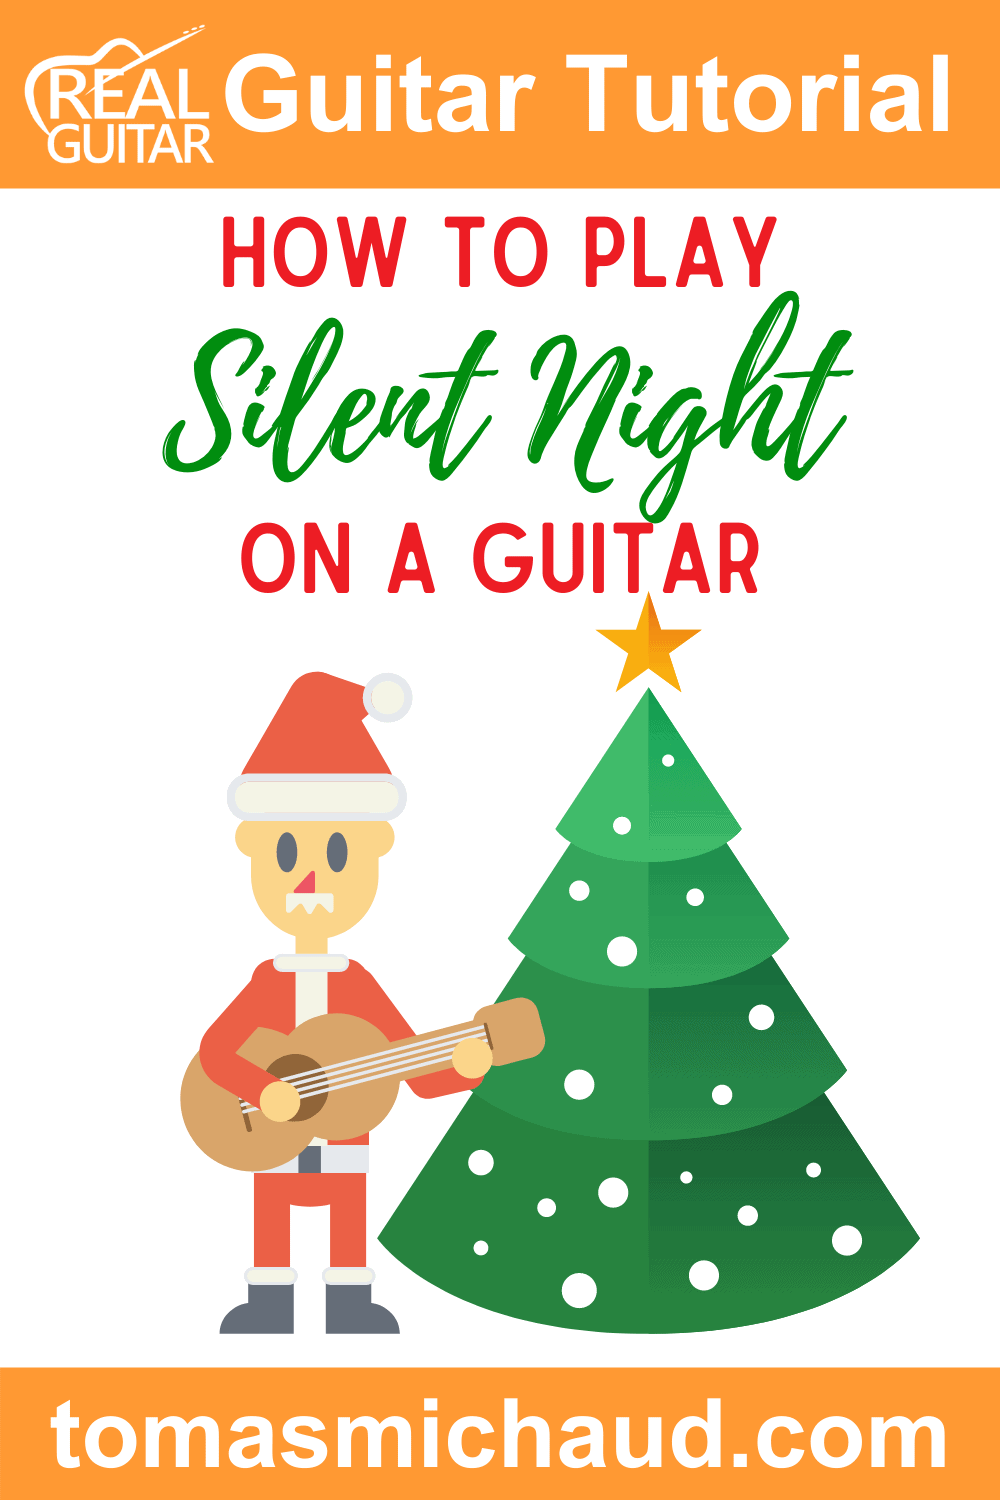 How To Play Silent Night On A Guitar